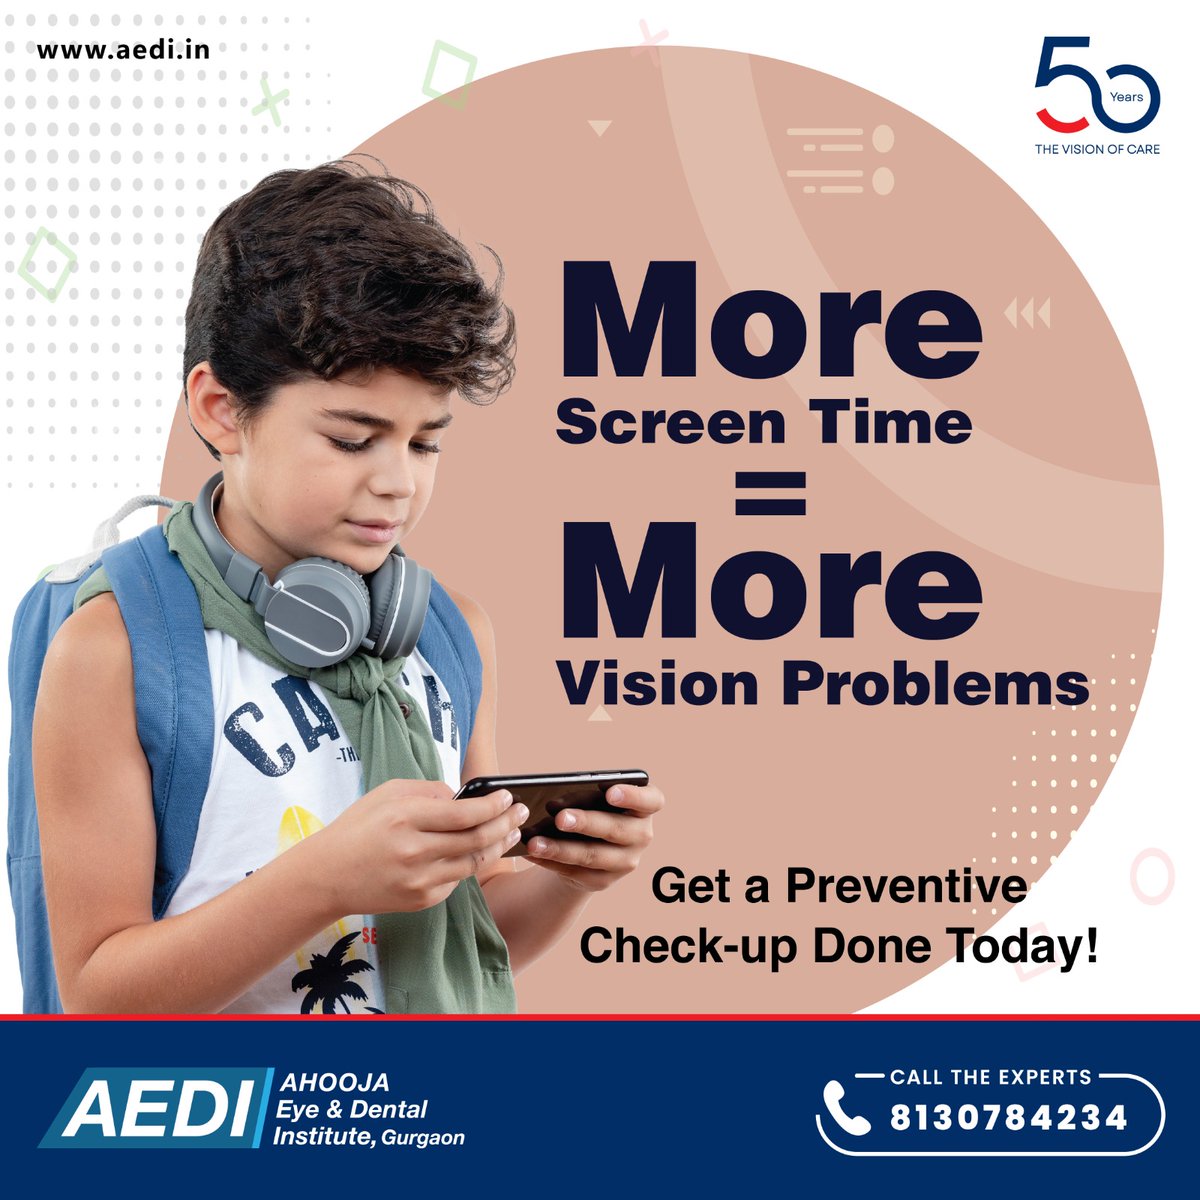 Early detection of visual-related issues are essential to avoid serious eye diseases in kids.
To know more about #PaediatricOphthalmology contact AEDI today.

#ChildEyeCare #EarlyDetection #EyeDiseases #HealthyEyes
.
.
.
#AhoojaEyeandDentalInstitute #Aedi  #50YearsOfVision